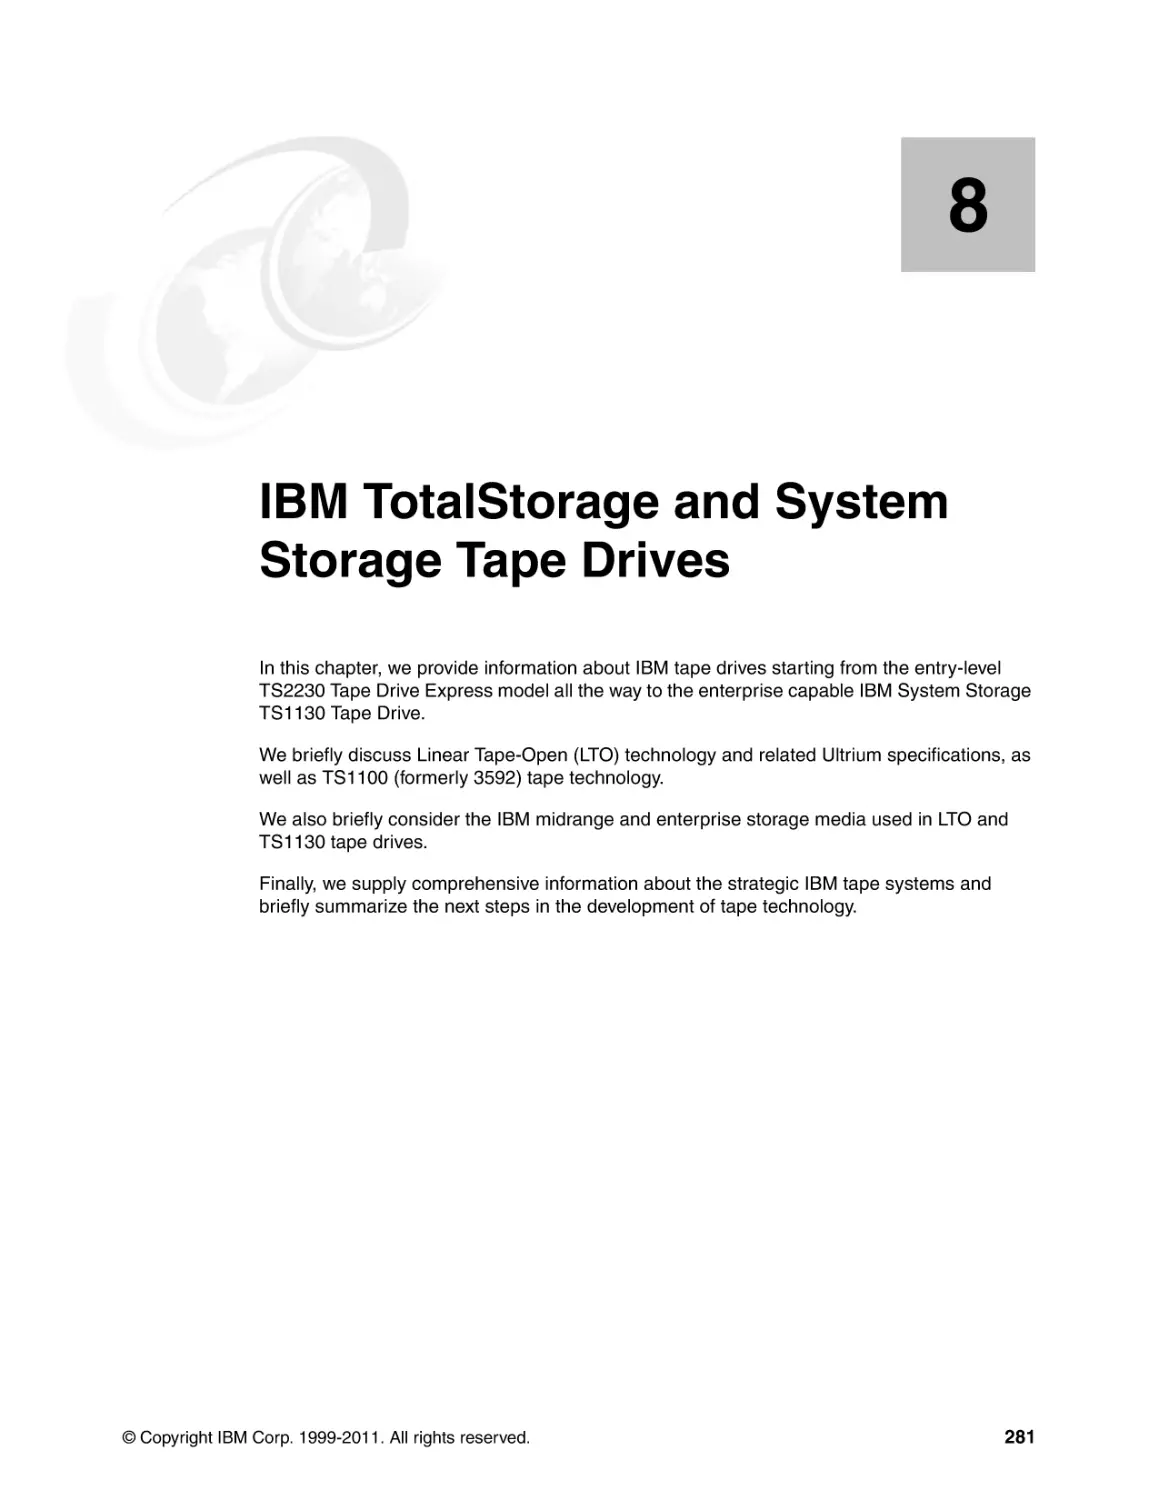 Chapter 8. IBM TotalStorage and System Storage Tape Drives